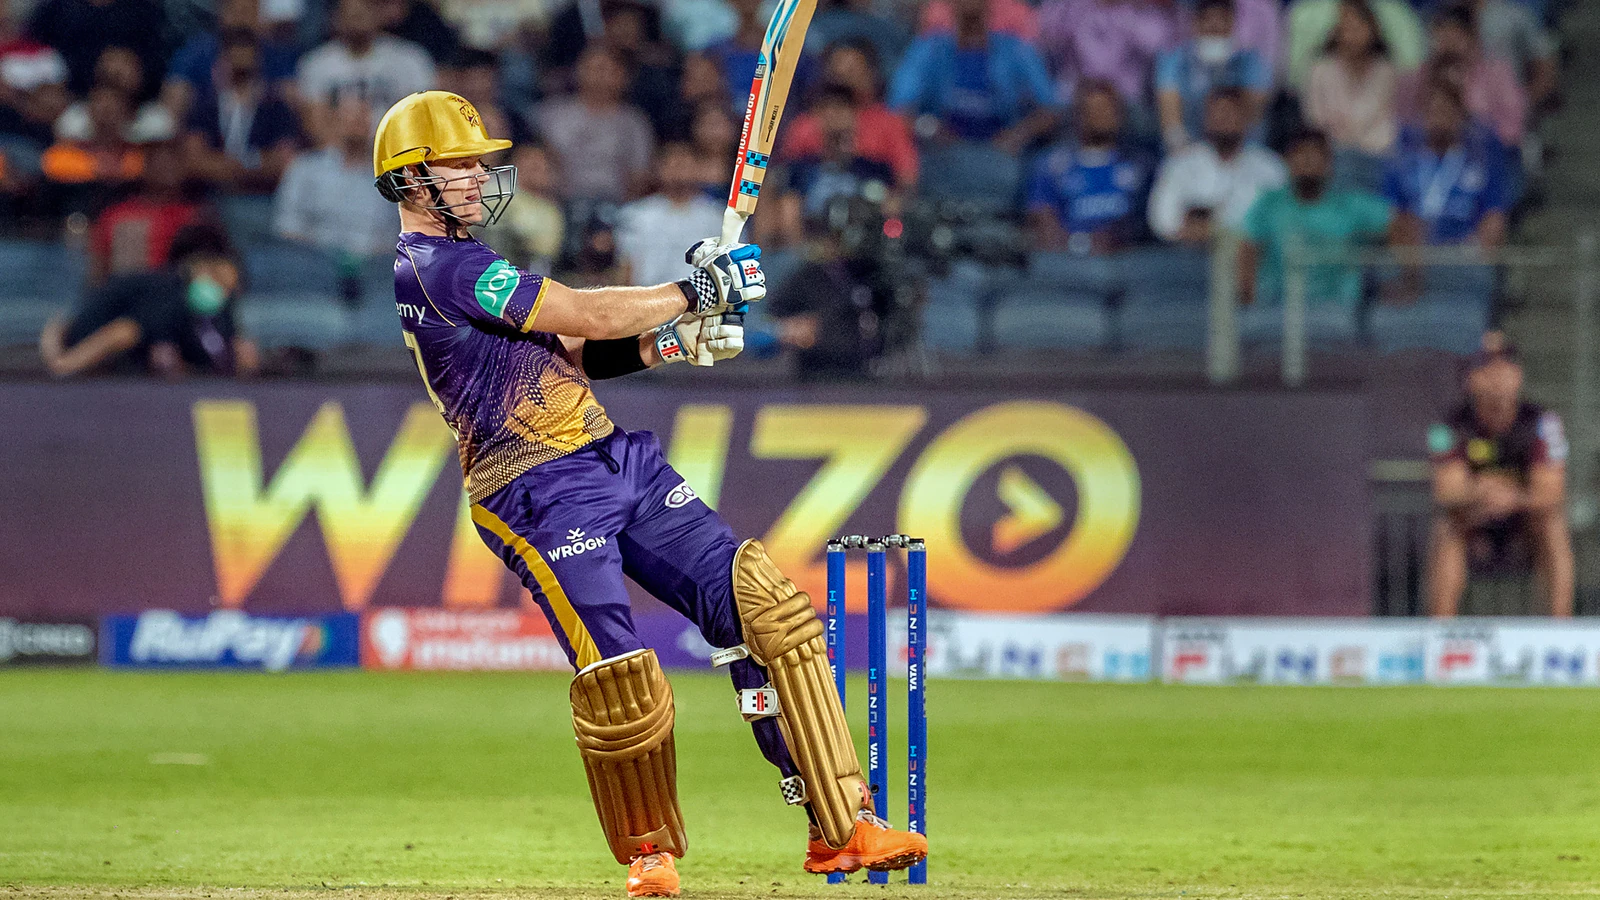 ‘When facing Jasprit Bumrah, I try to hit as hard as I can’: Pat Cummins after record fifty in KKR vs MI IPL 2022 match